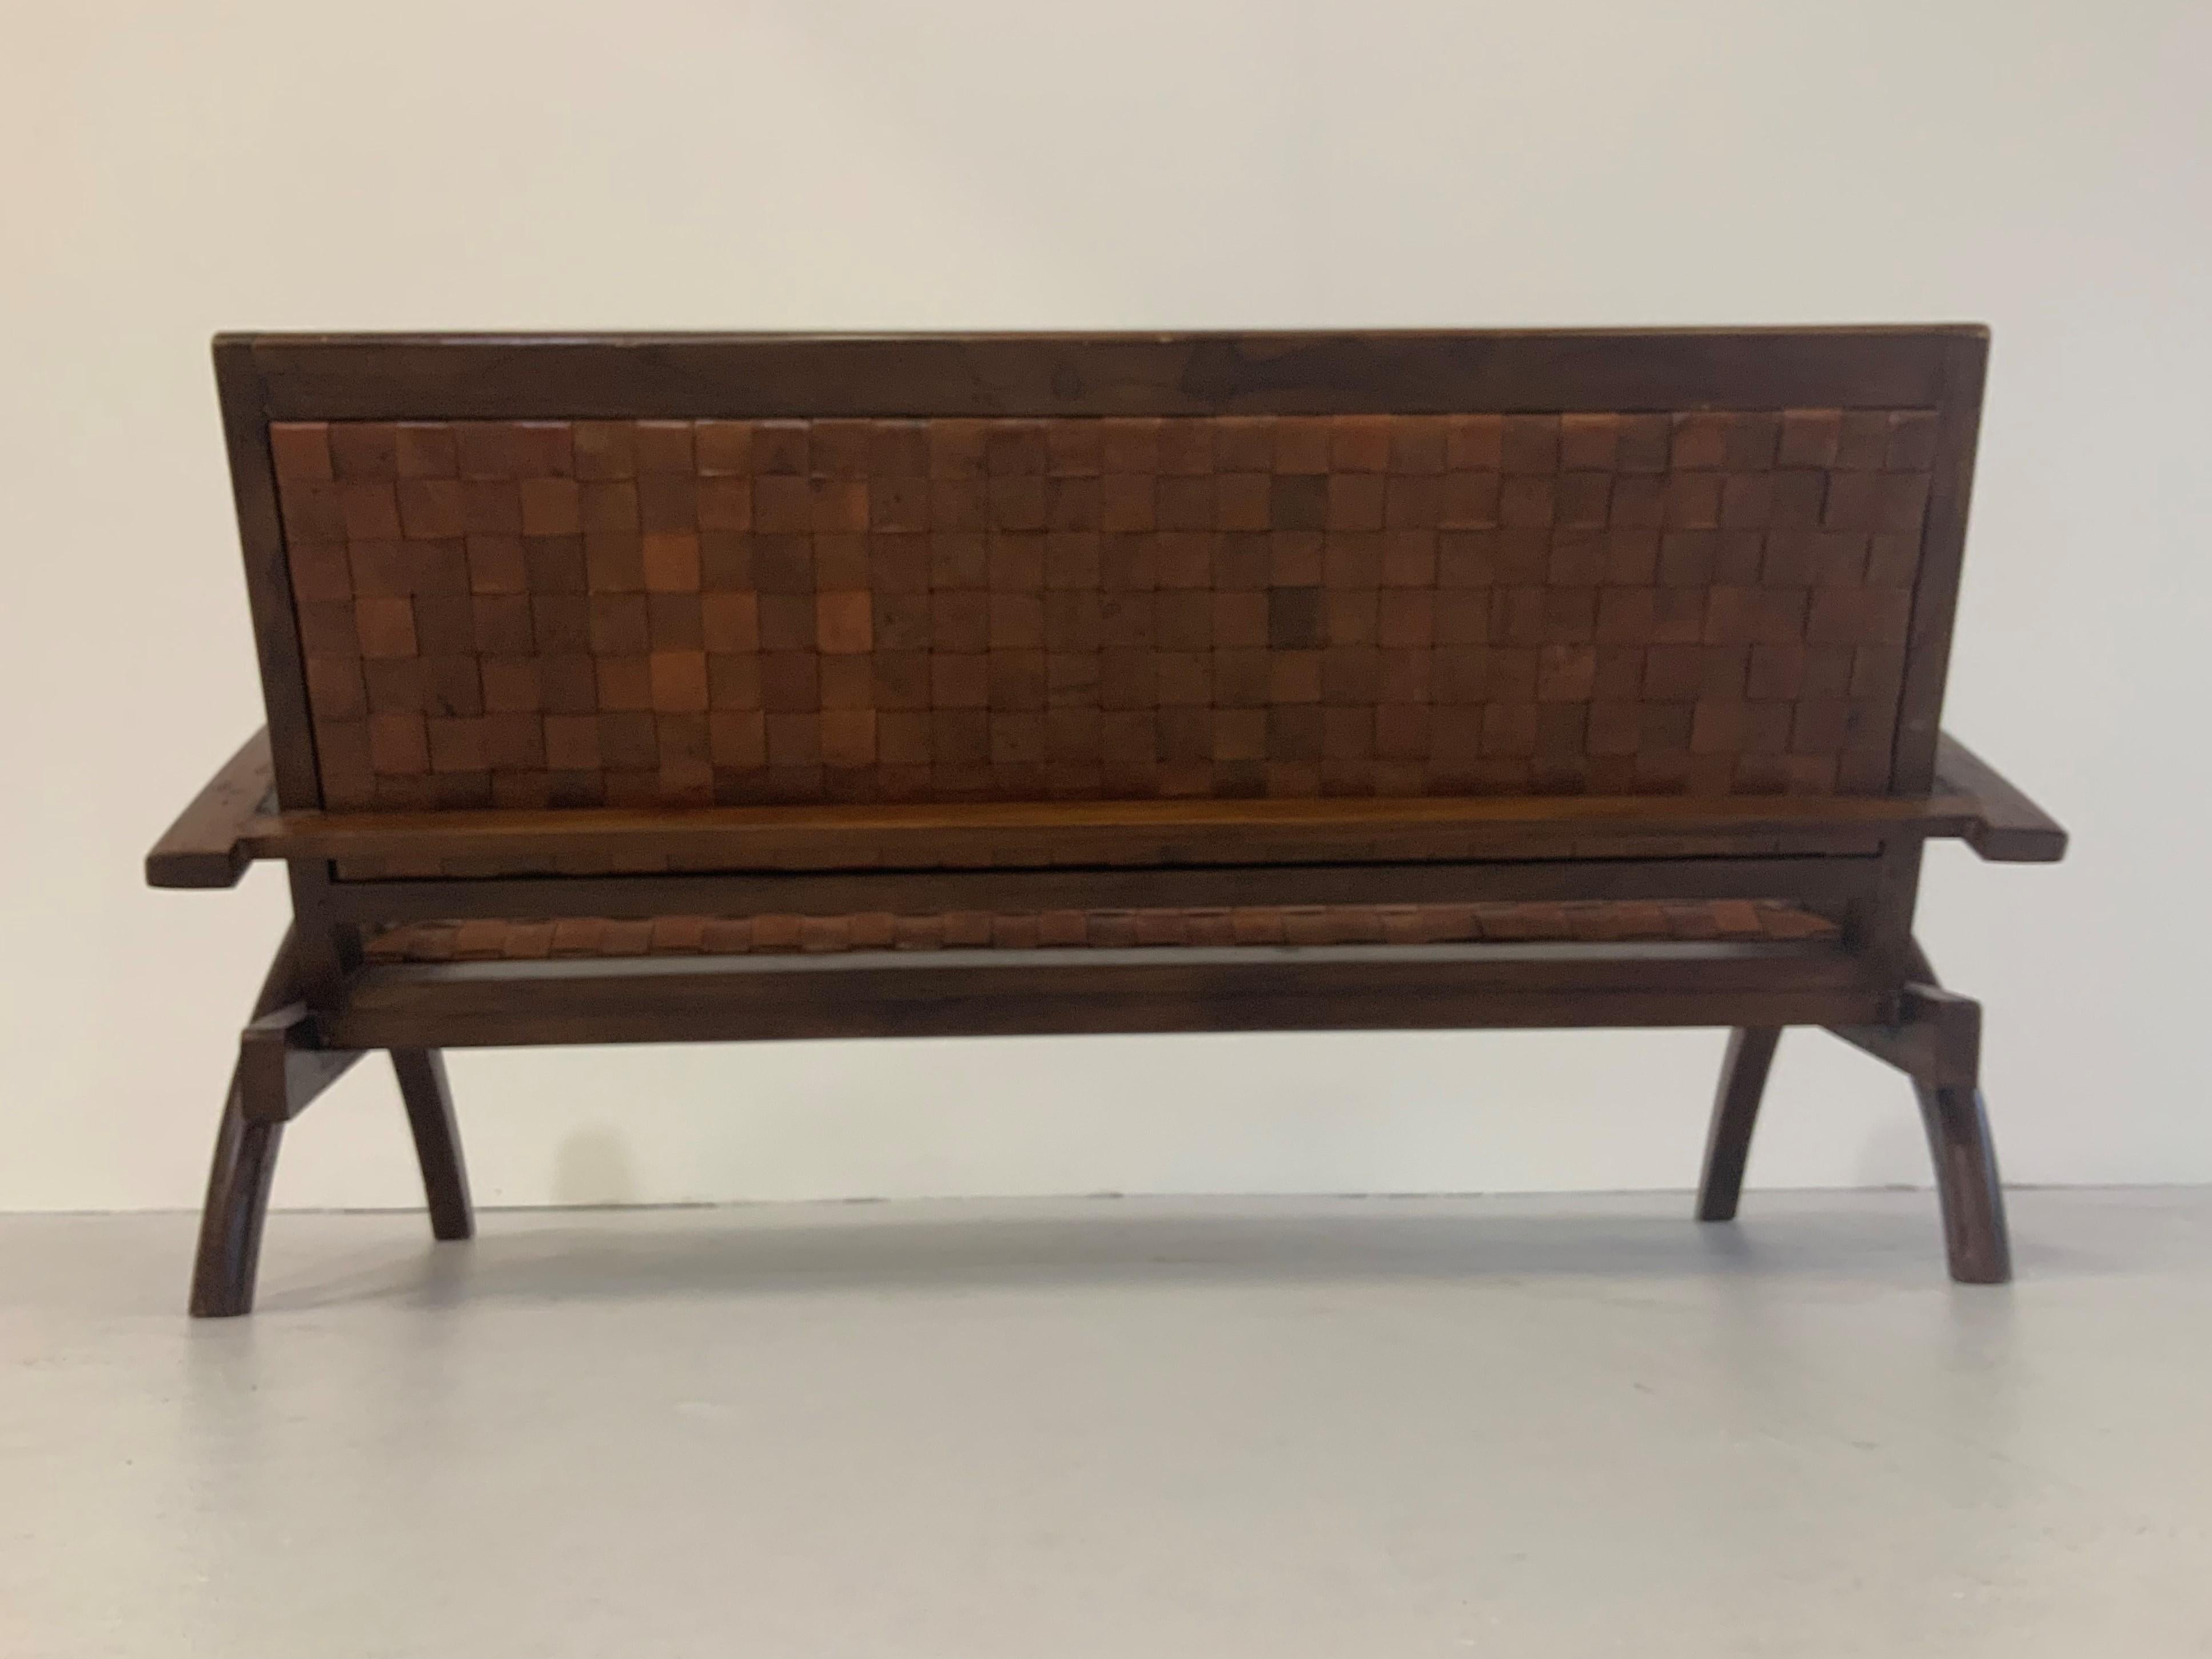 Sculptural Midcentury Scandinavian Vintage Woven Leather Bench Lounge Sofa 1960s In Good Condition For Sale In Hamburg, DE